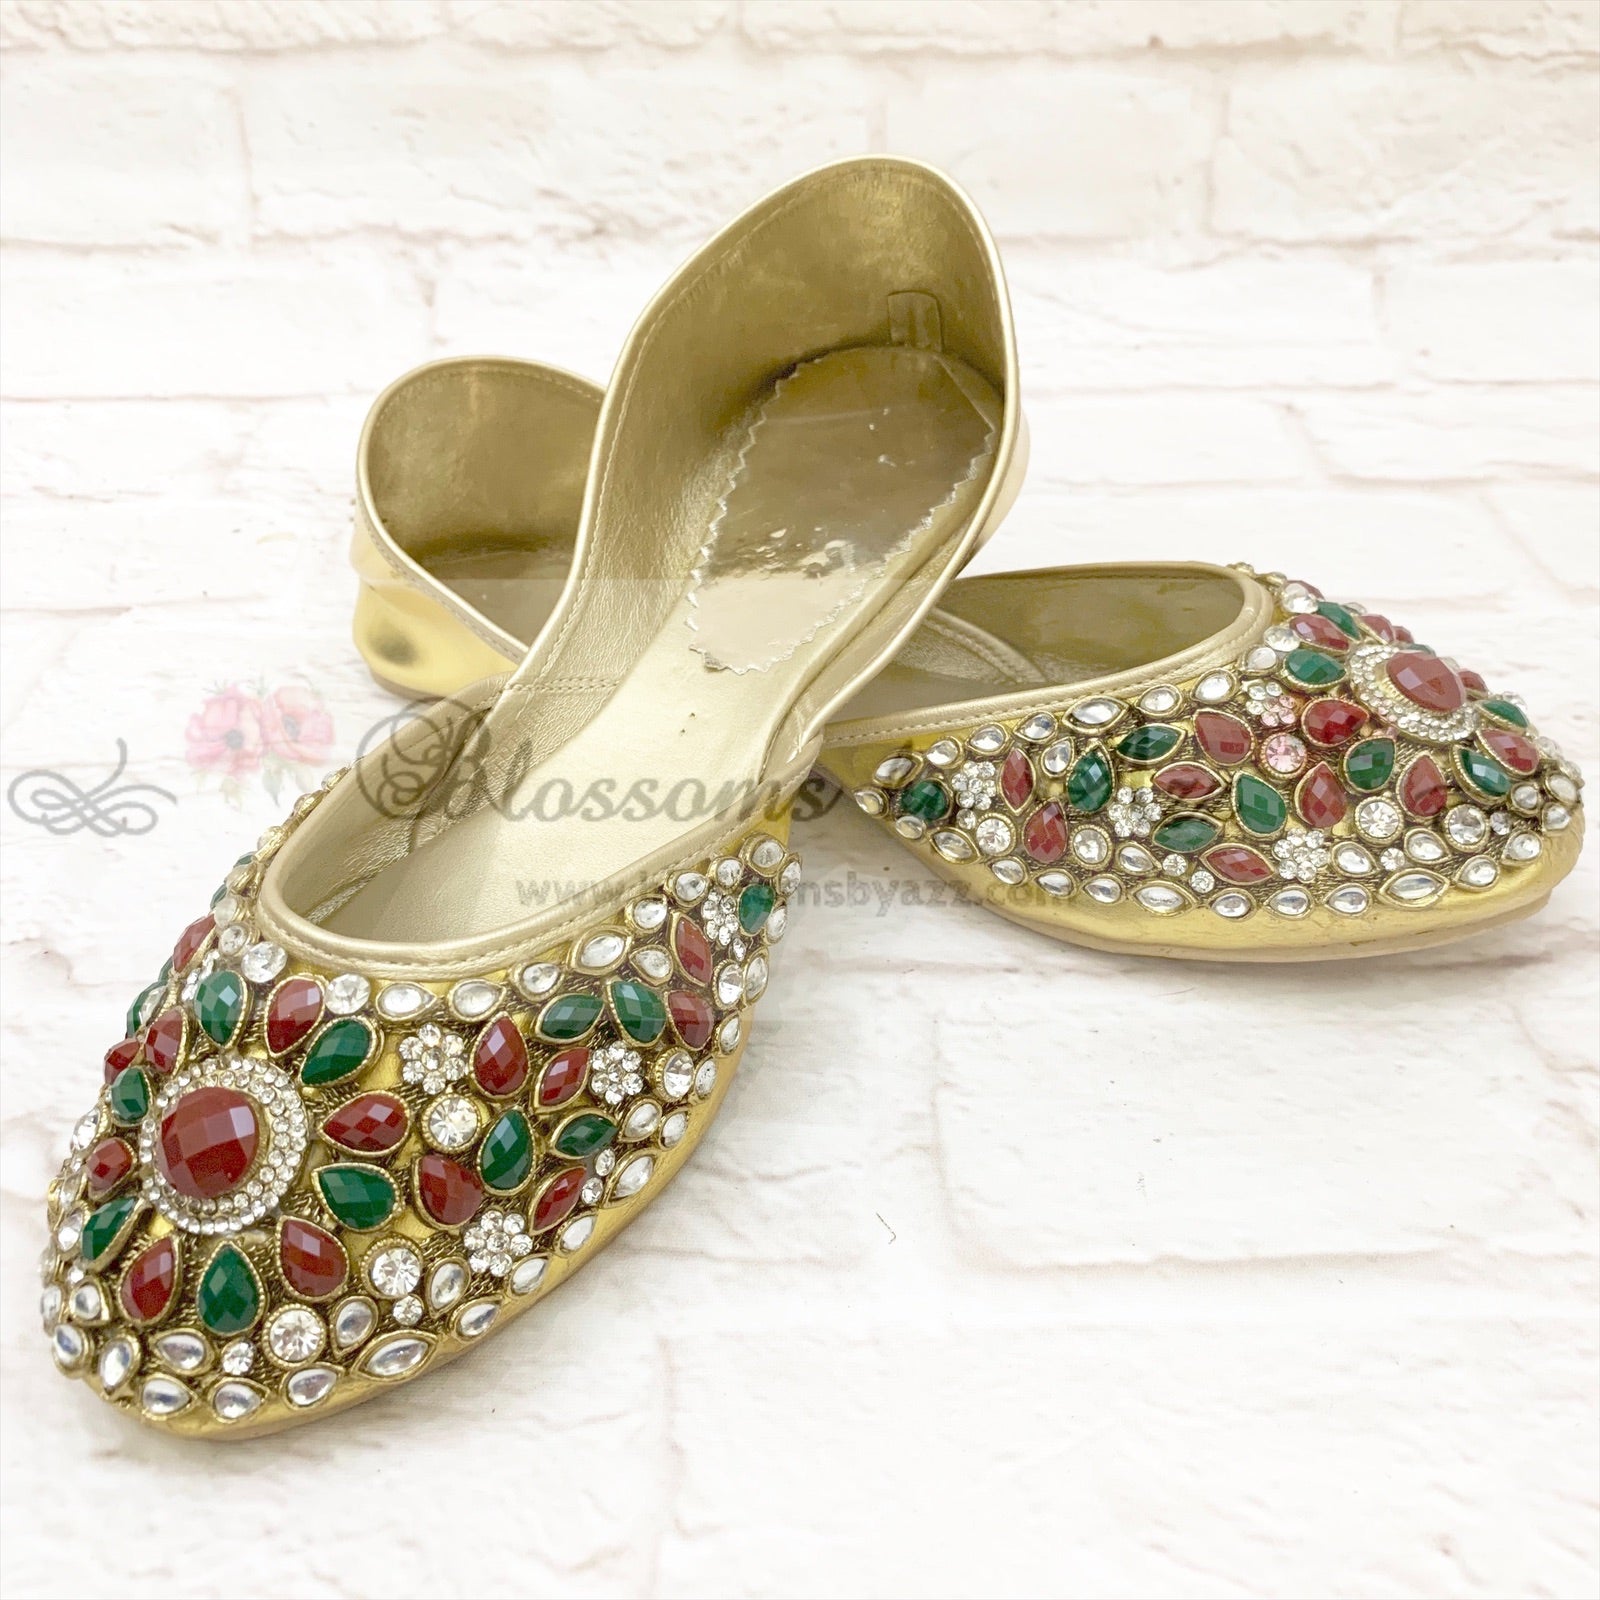 Stone Pumps (Khussa) - 003- Red & Green - Blossoms by Azz